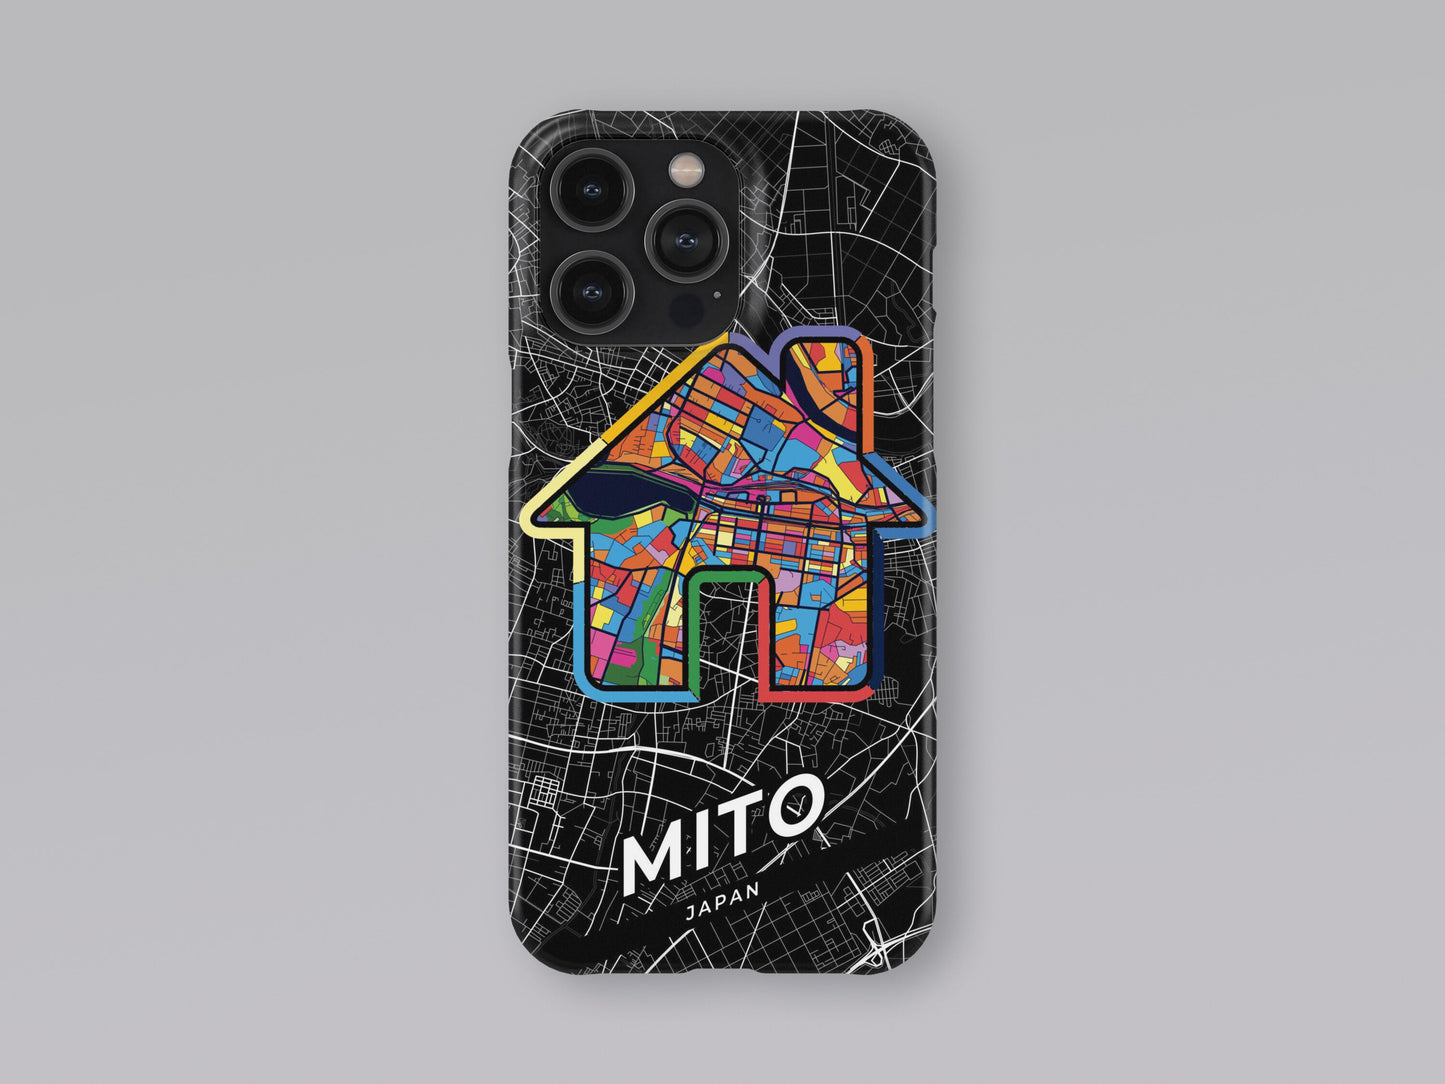 Mito Japan slim phone case with colorful icon 3